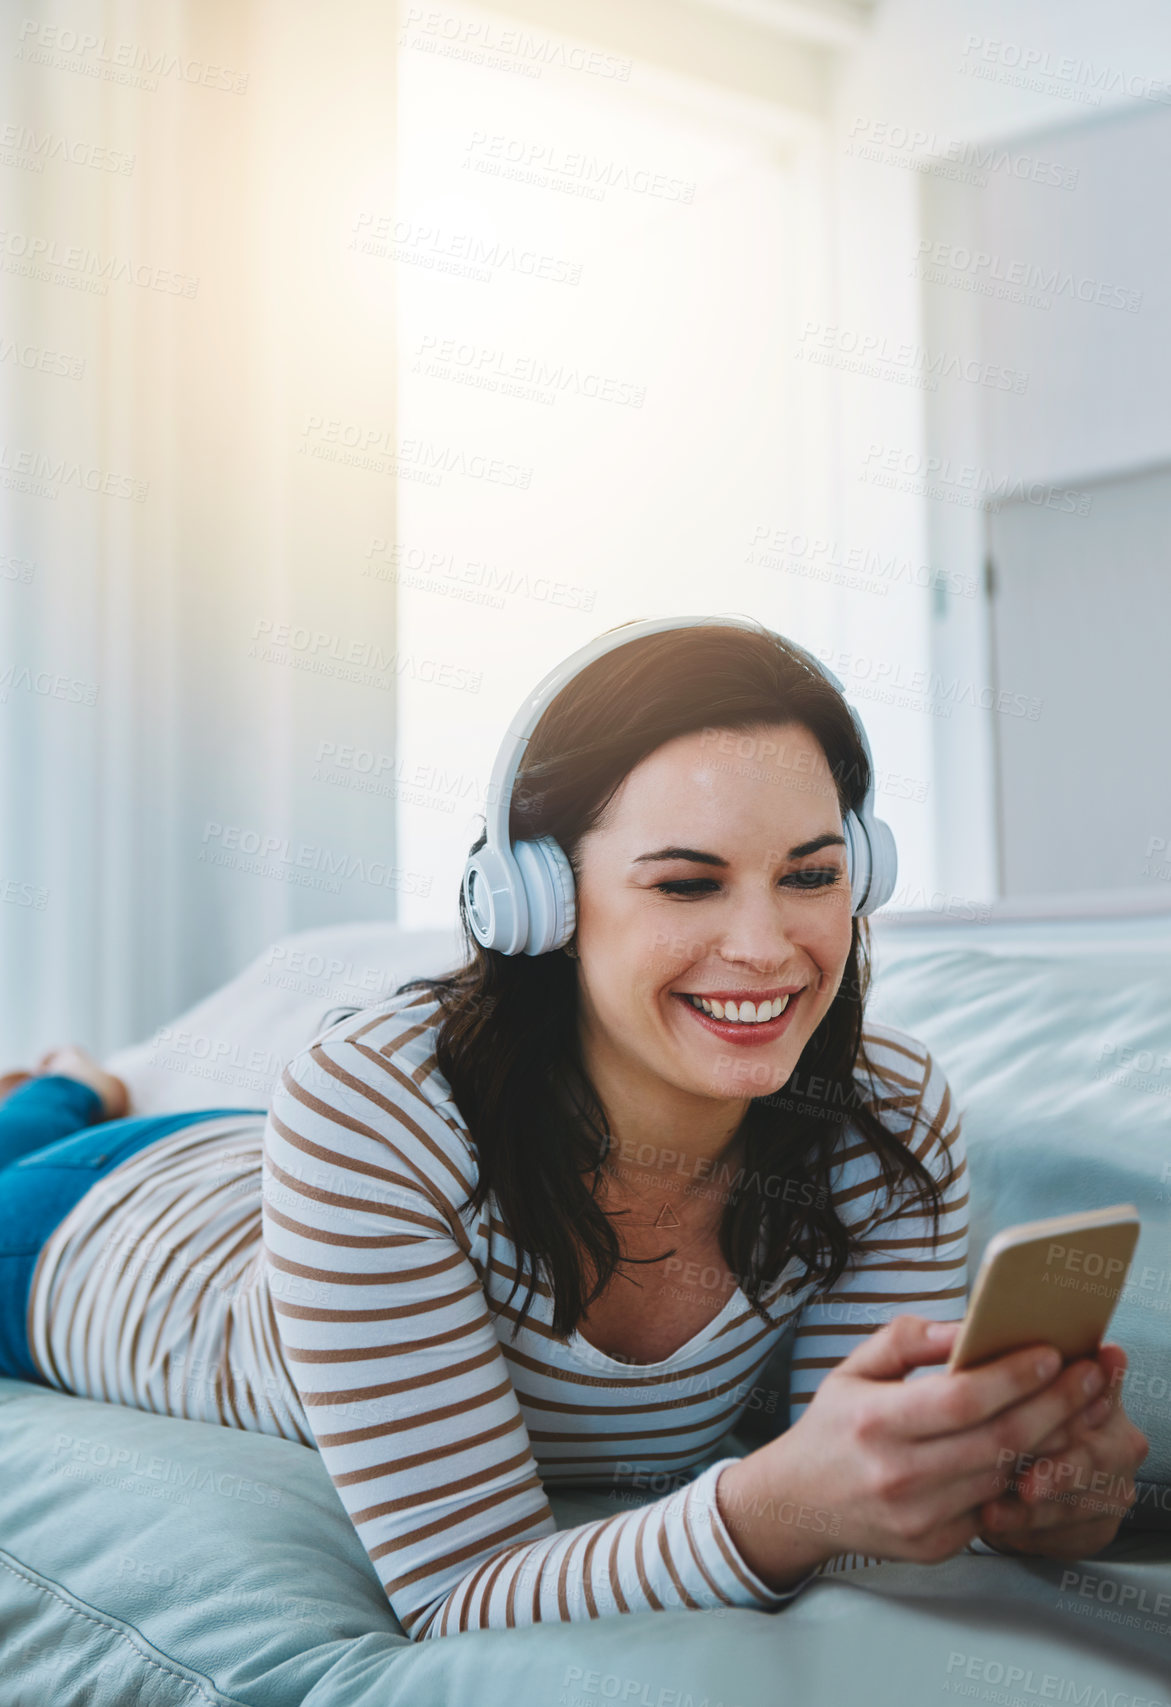 Buy stock photo Shot of a young woman relaxing on the sofa and using her phone and headphones